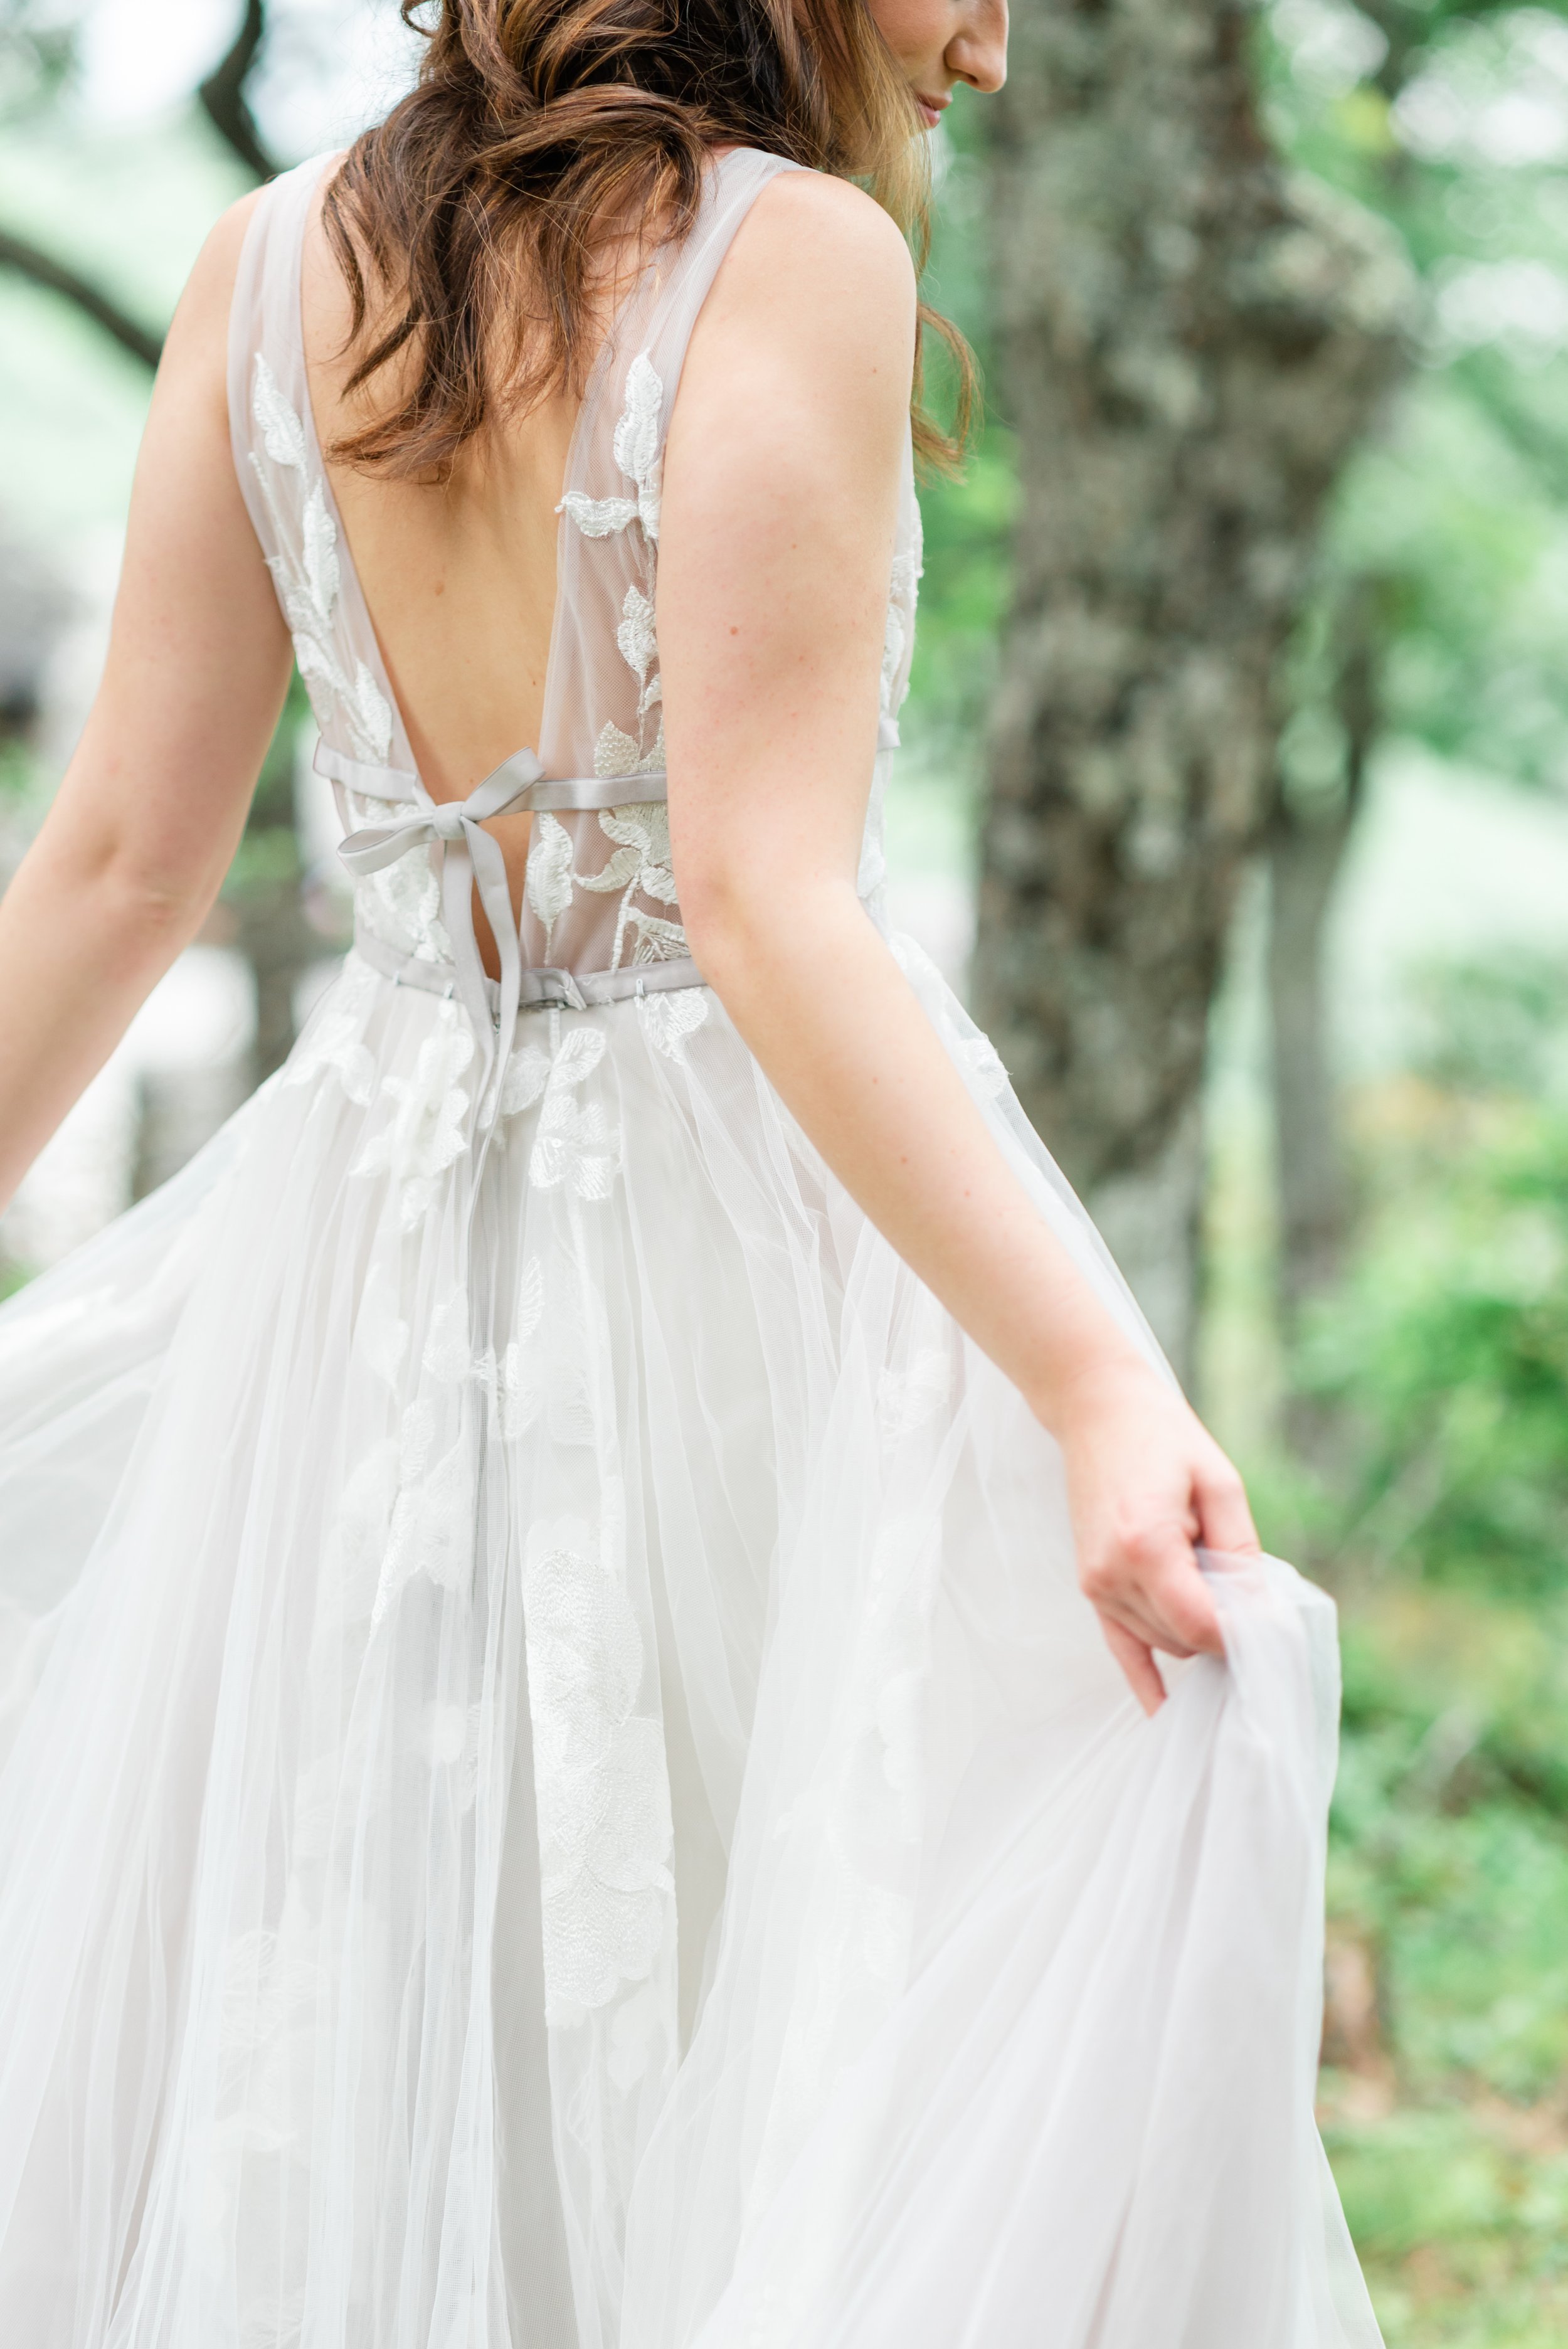 ivory-and-beau-blog-down-for-the-gown-christina-real-bride-galatea-by-willowby-wedding-dress-boho-bride-boho-wedding-dress-mountain-wedding-bridal-gown-wedding-gown-bridal-shop-bridal-boutique-bridal-style-bridal-inspiration-Christina & Patrick-169.jpg